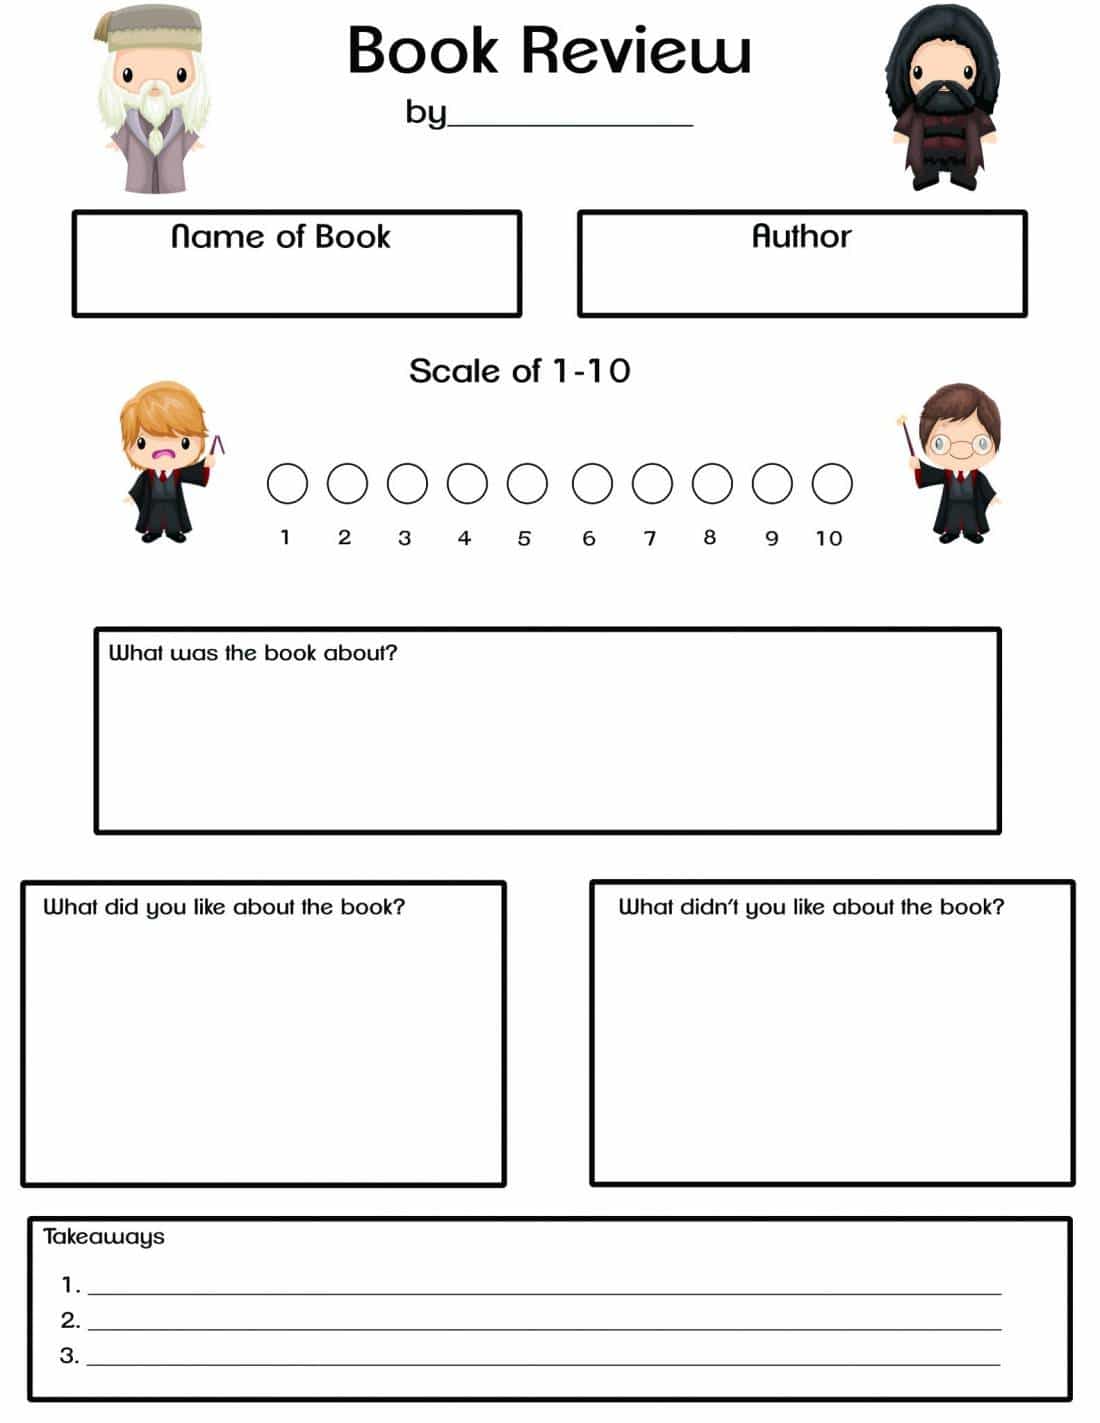 Harry Potter Themed Reading Log & Book Review Form With Sandwich Book Report Printable Template